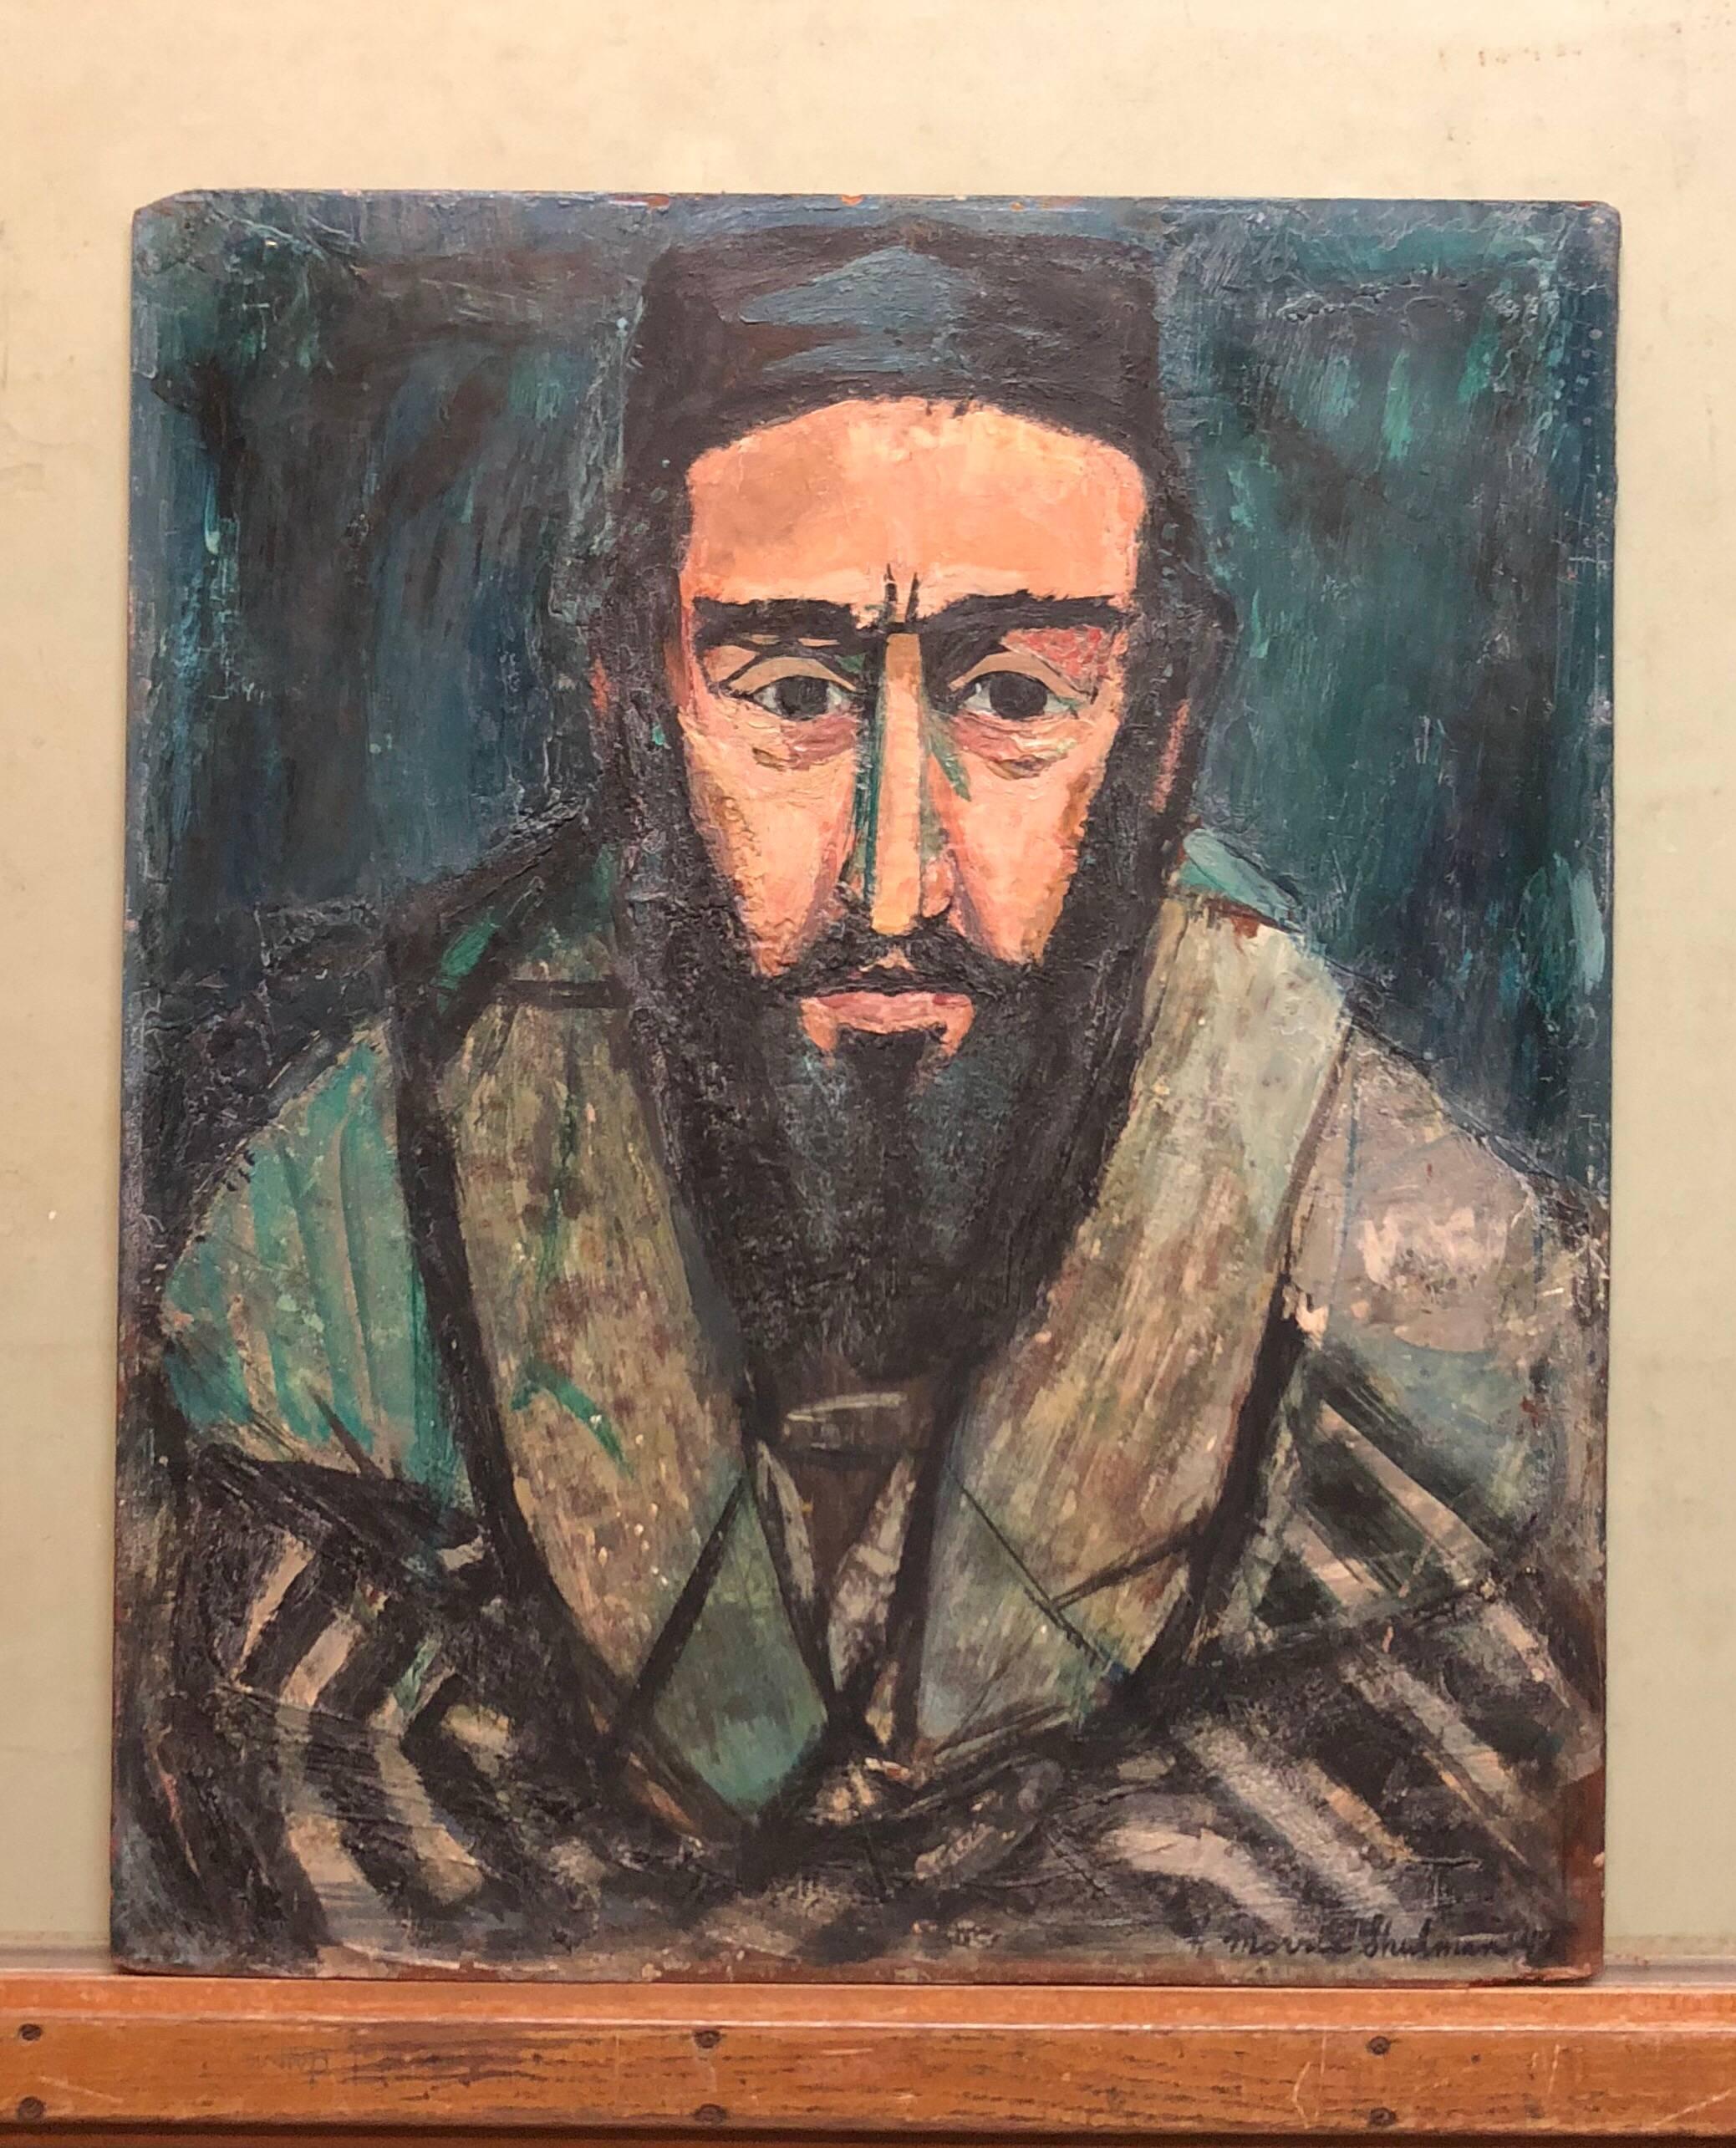 Judaica Rabbi Portrait Oil Painting American WPA Abstract Expressionist Artist - Gray Portrait Painting by Morris Shulman